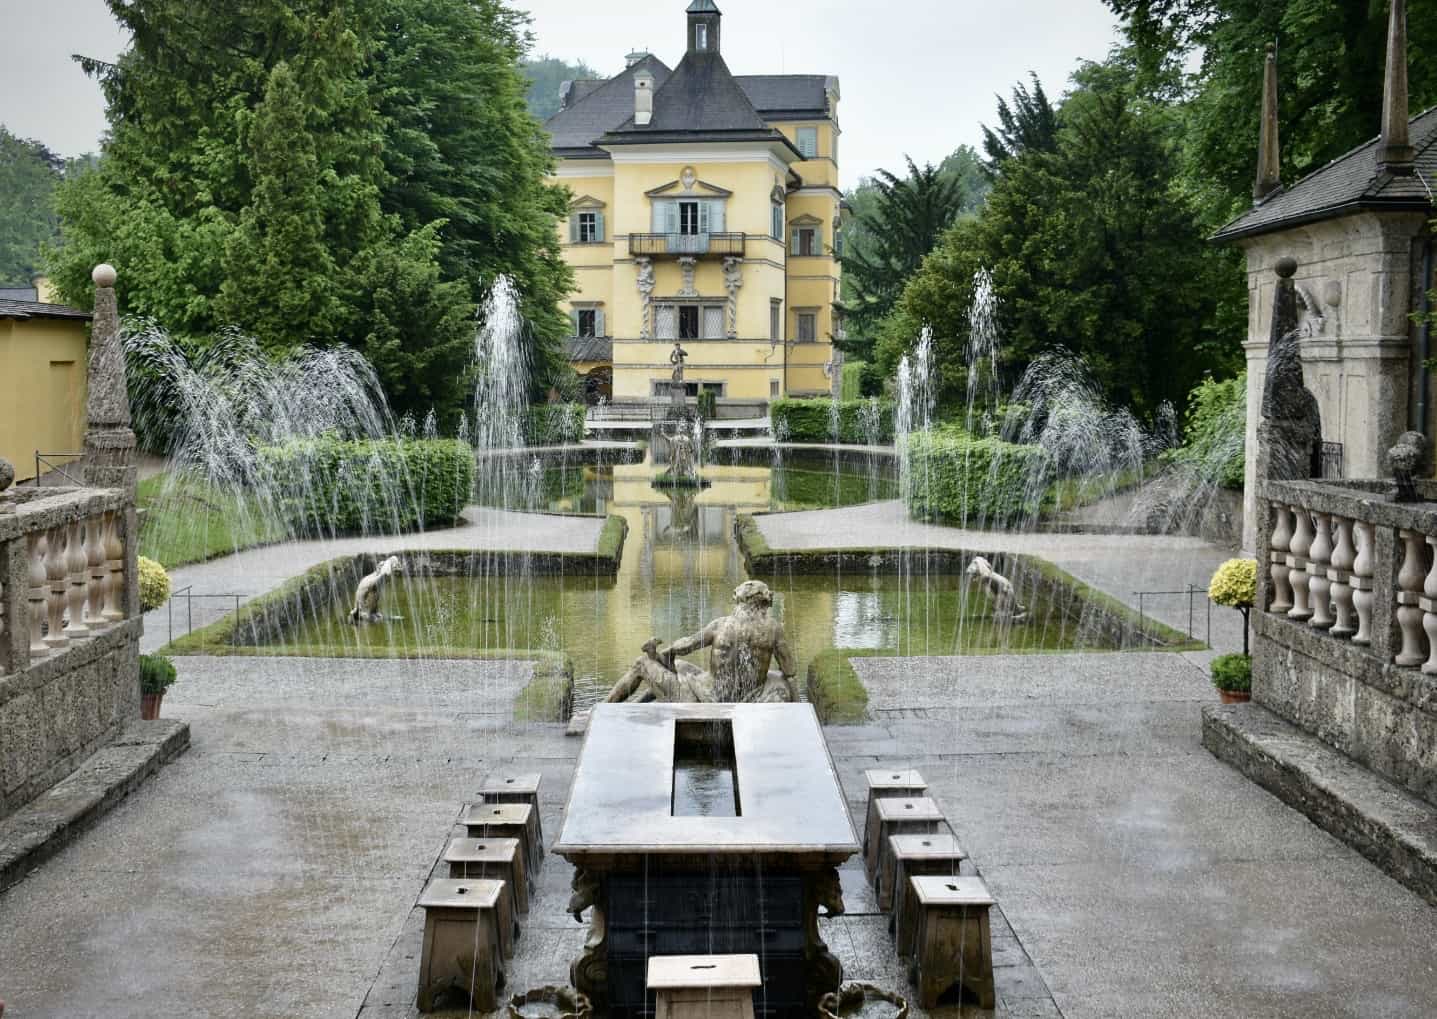 Trick Fountains at Hellbrunn Palace in Salzburg